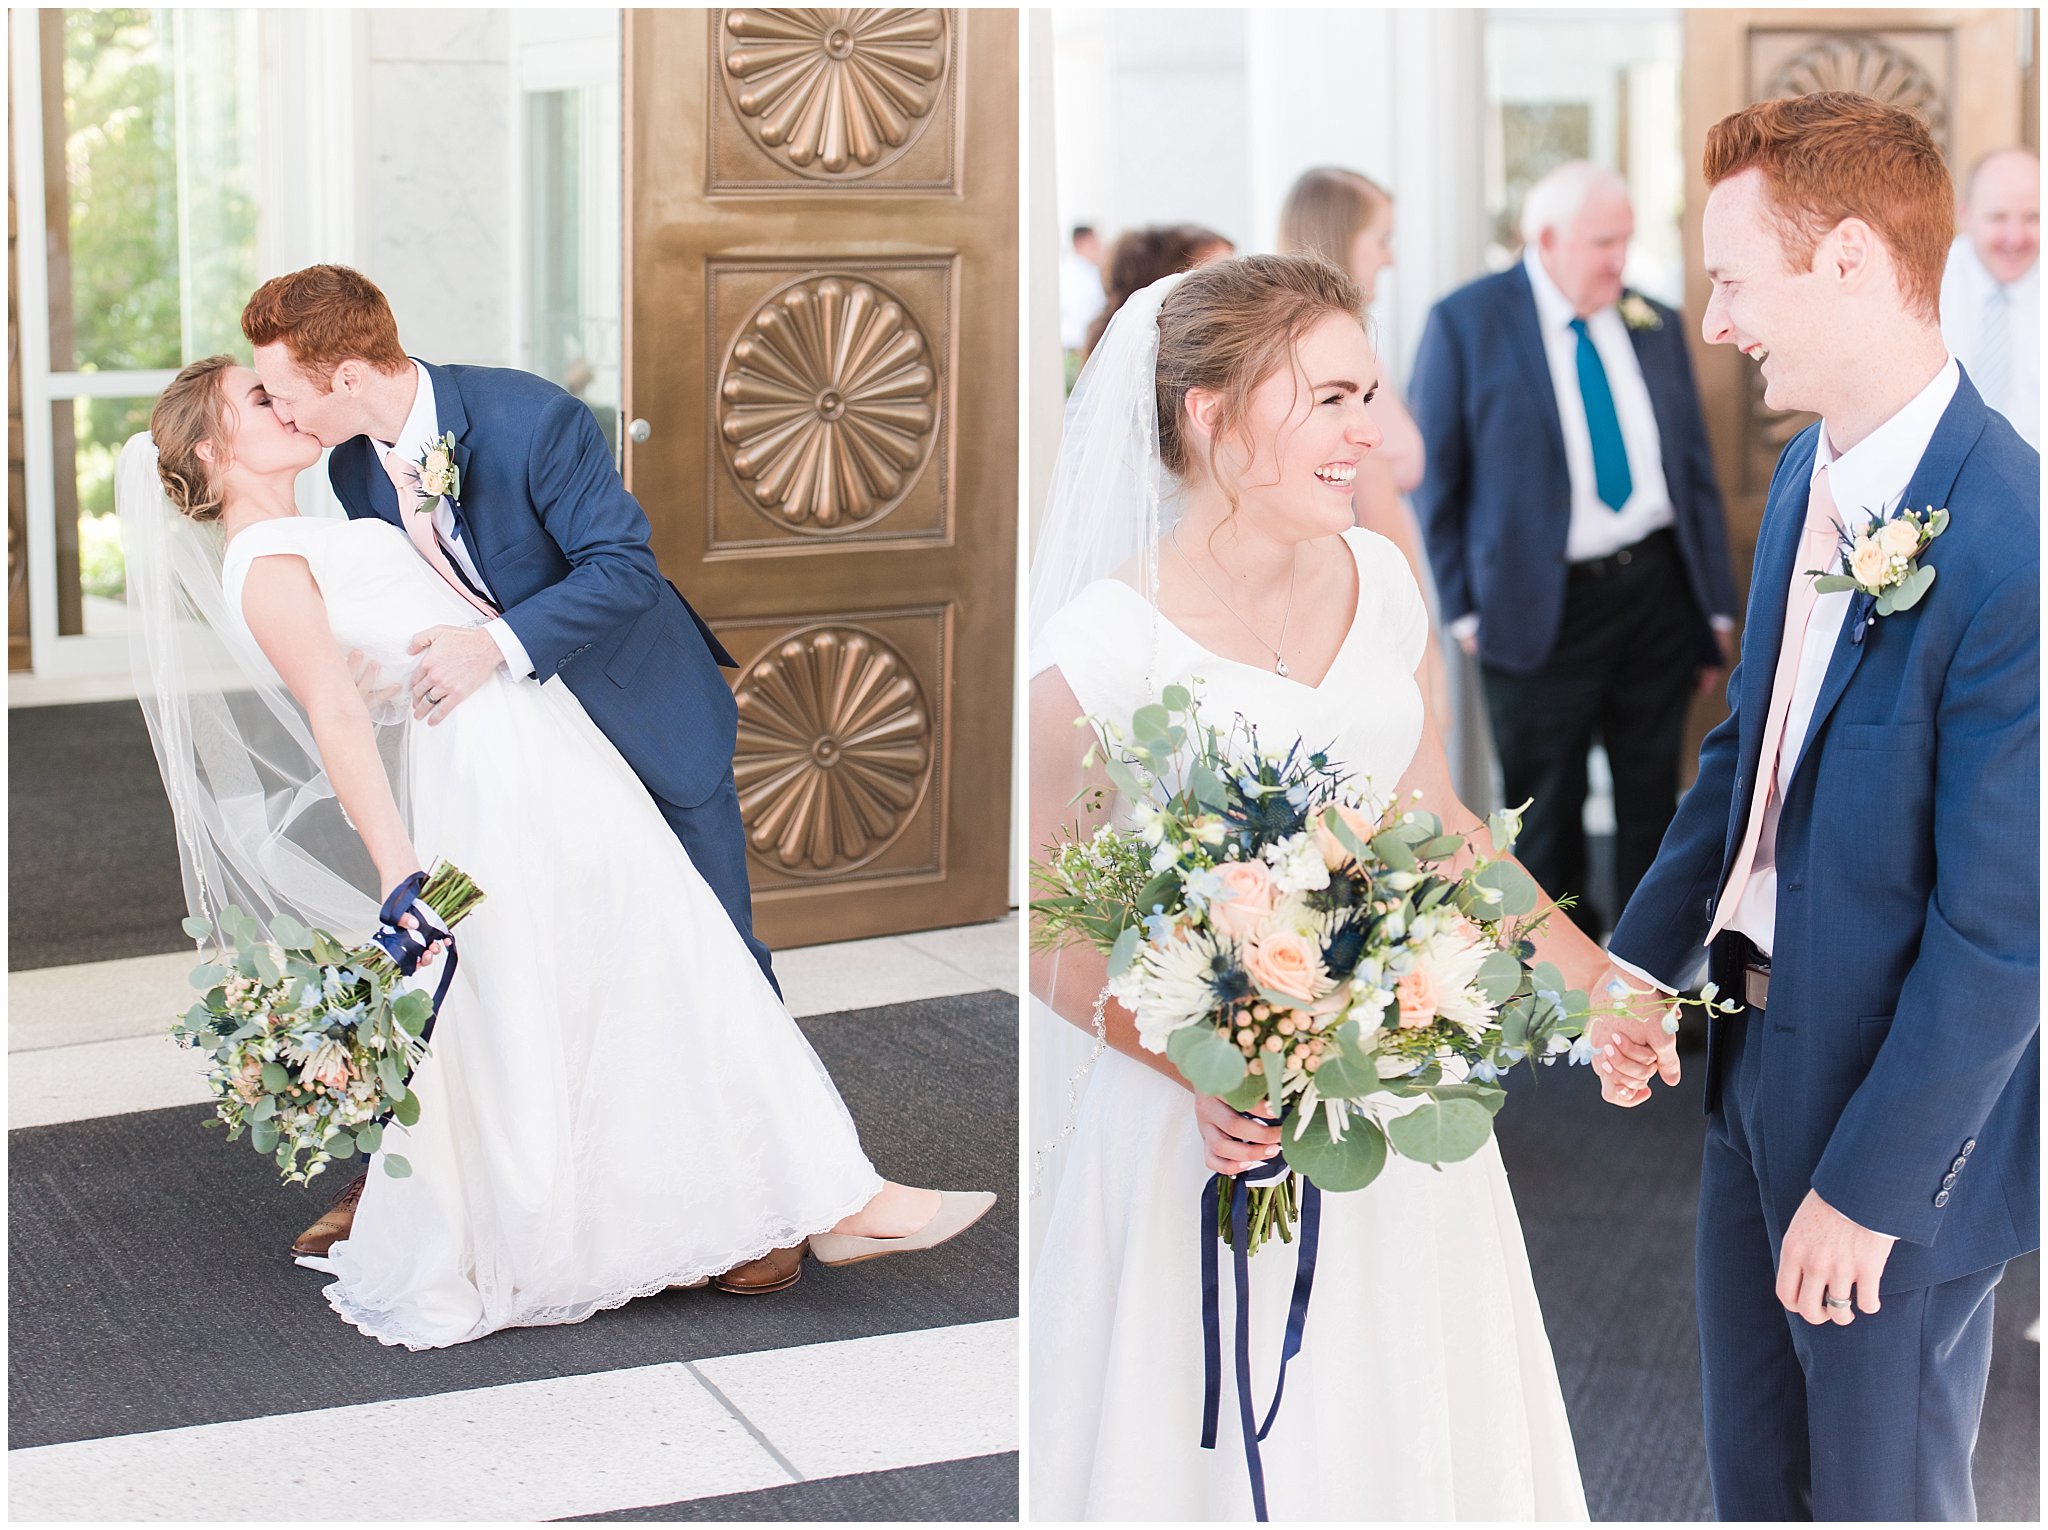 Bride and groom exit the temple | Bountiful Temple Wedding and Oak Hills Reception | Jessie and Dallin Photography